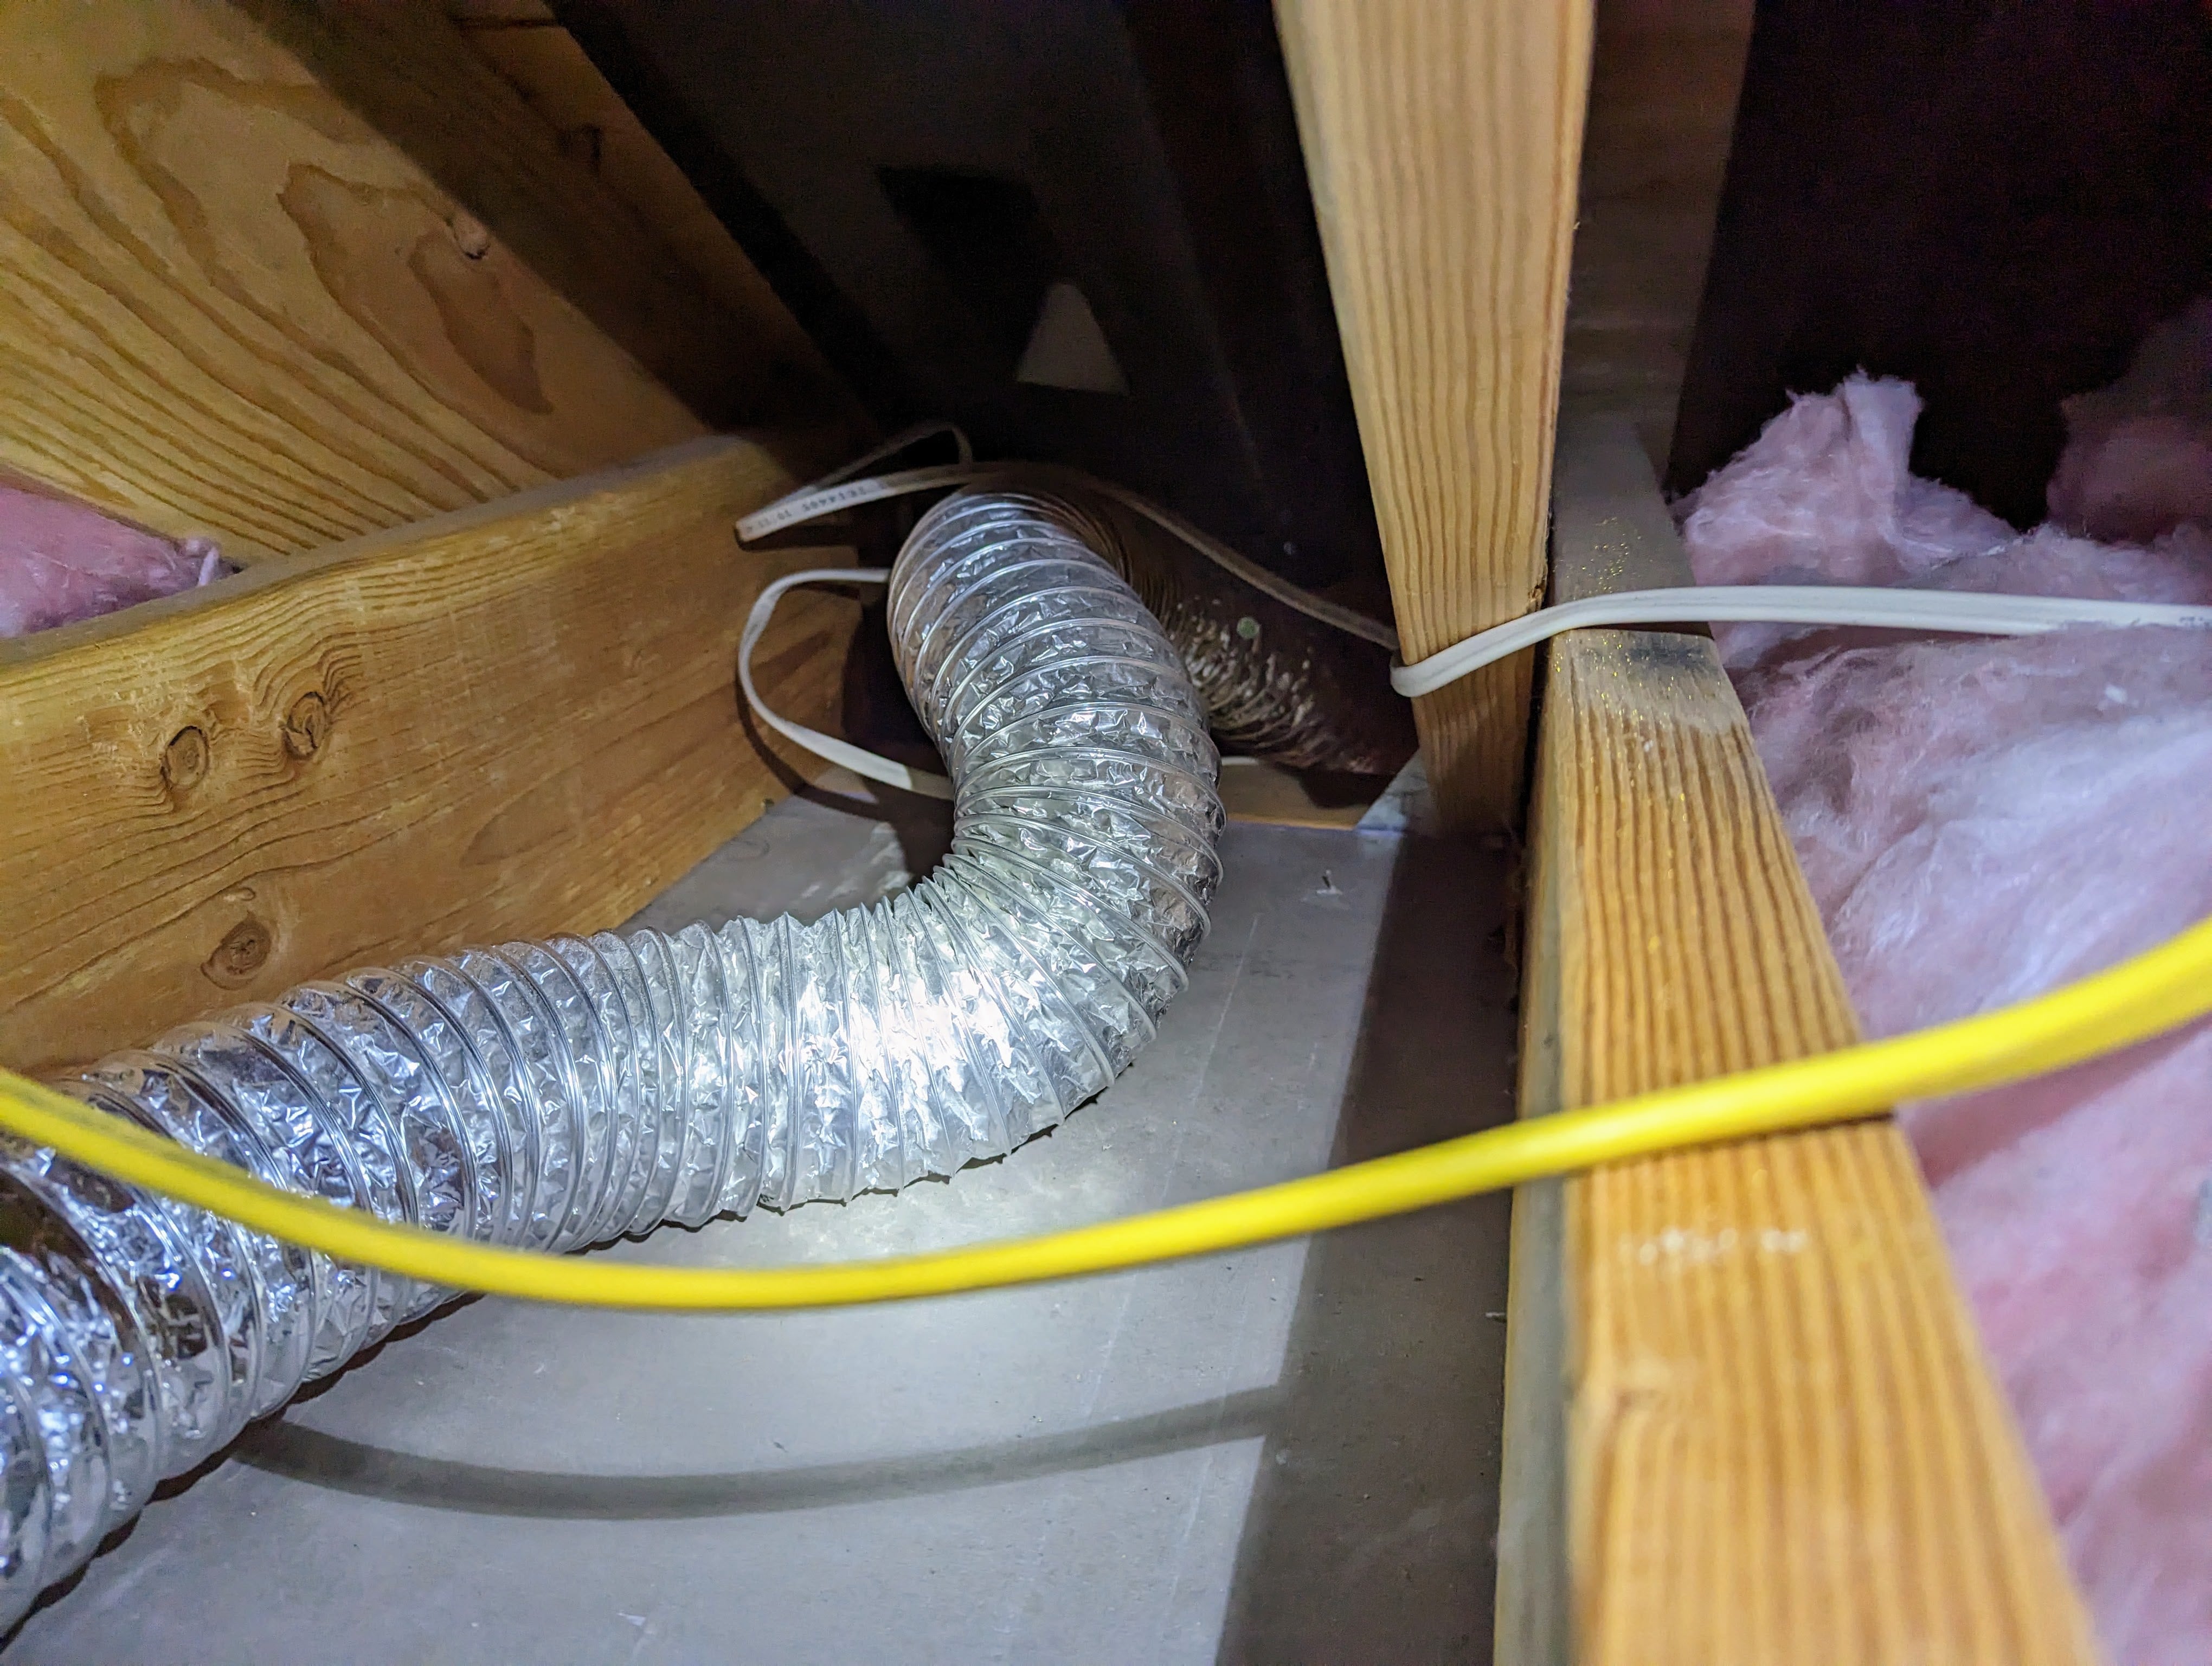 Exhaust duct from attic